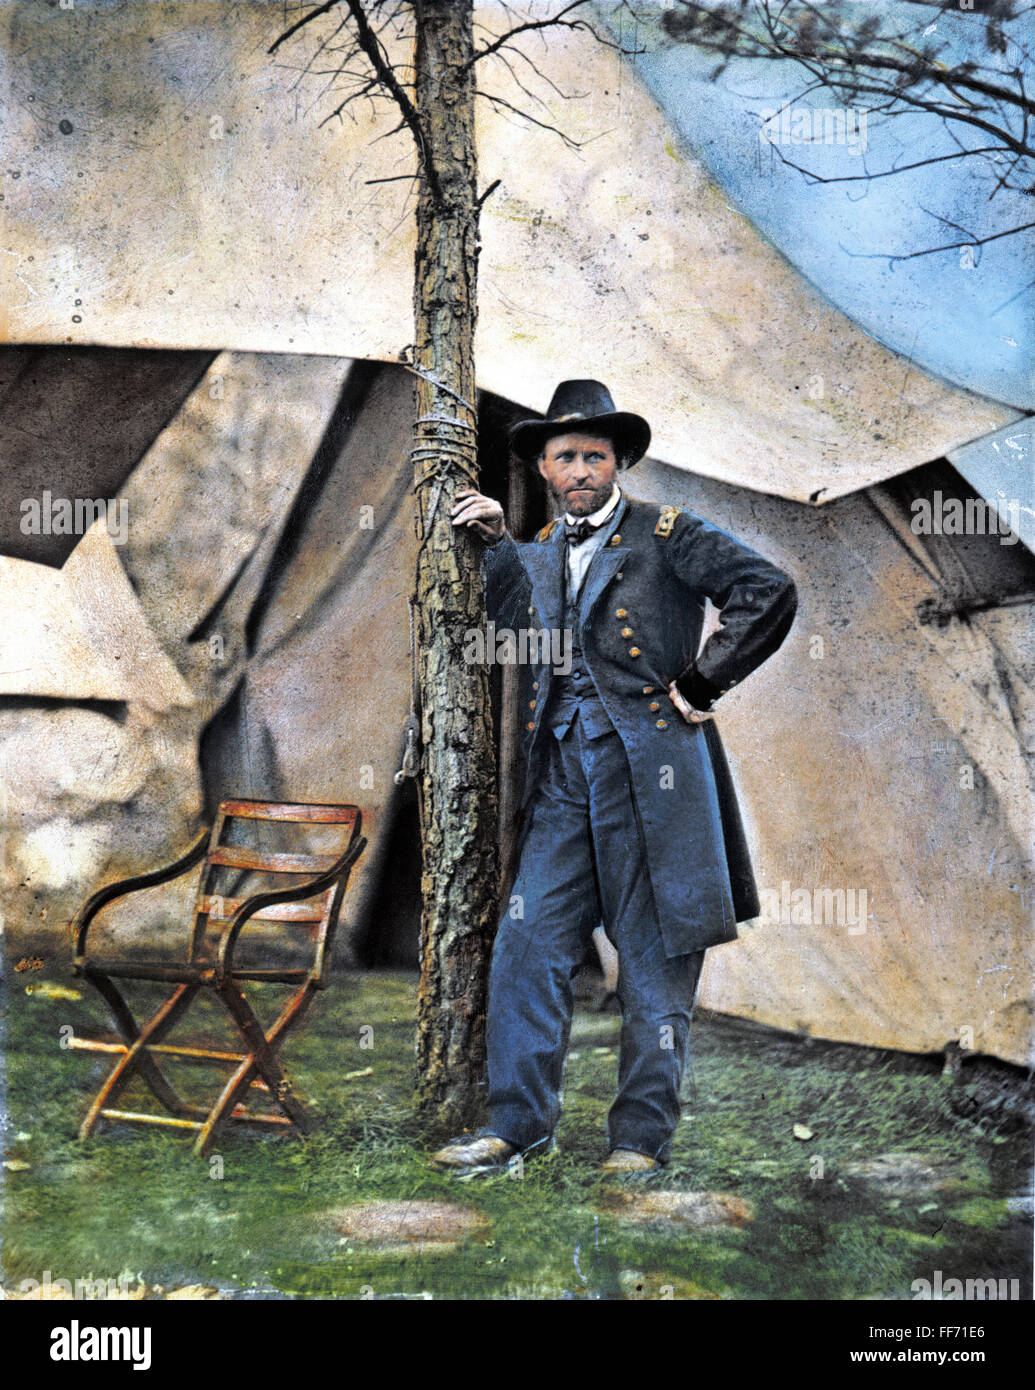 ULYSSES S. GRANT. /nCommander of the Union Armies, Ulysses S. Grant, at City Point, Virginia, during the siege of Petersburg, Virginia, during the American Civil War, 1864. Oil over photograph. Stock Photo